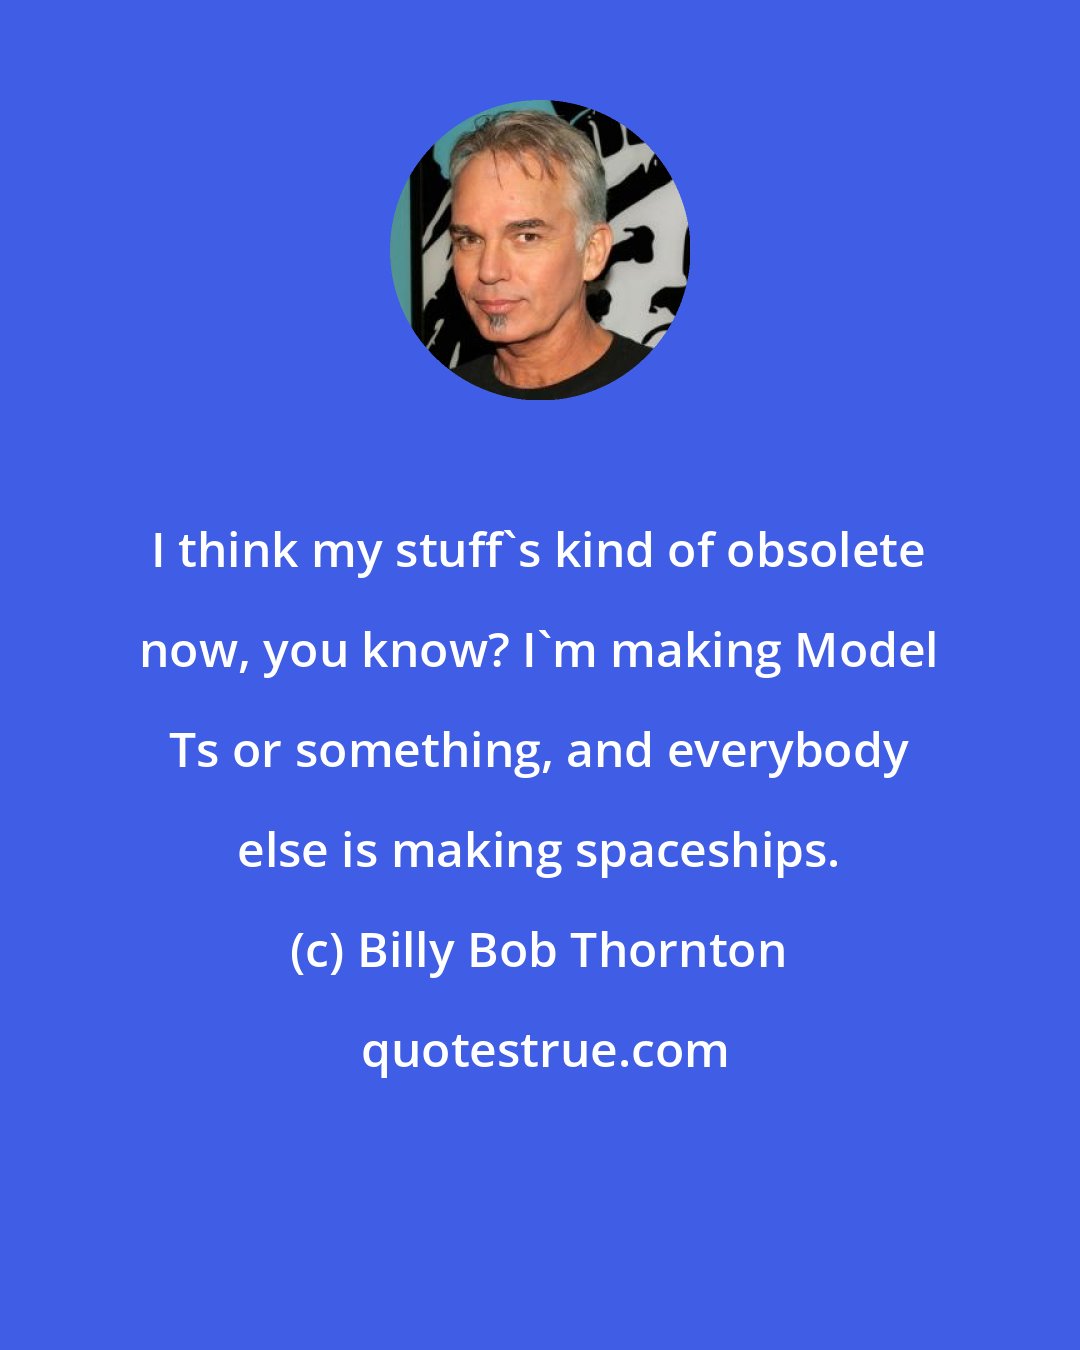 Billy Bob Thornton: I think my stuff's kind of obsolete now, you know? I'm making Model Ts or something, and everybody else is making spaceships.